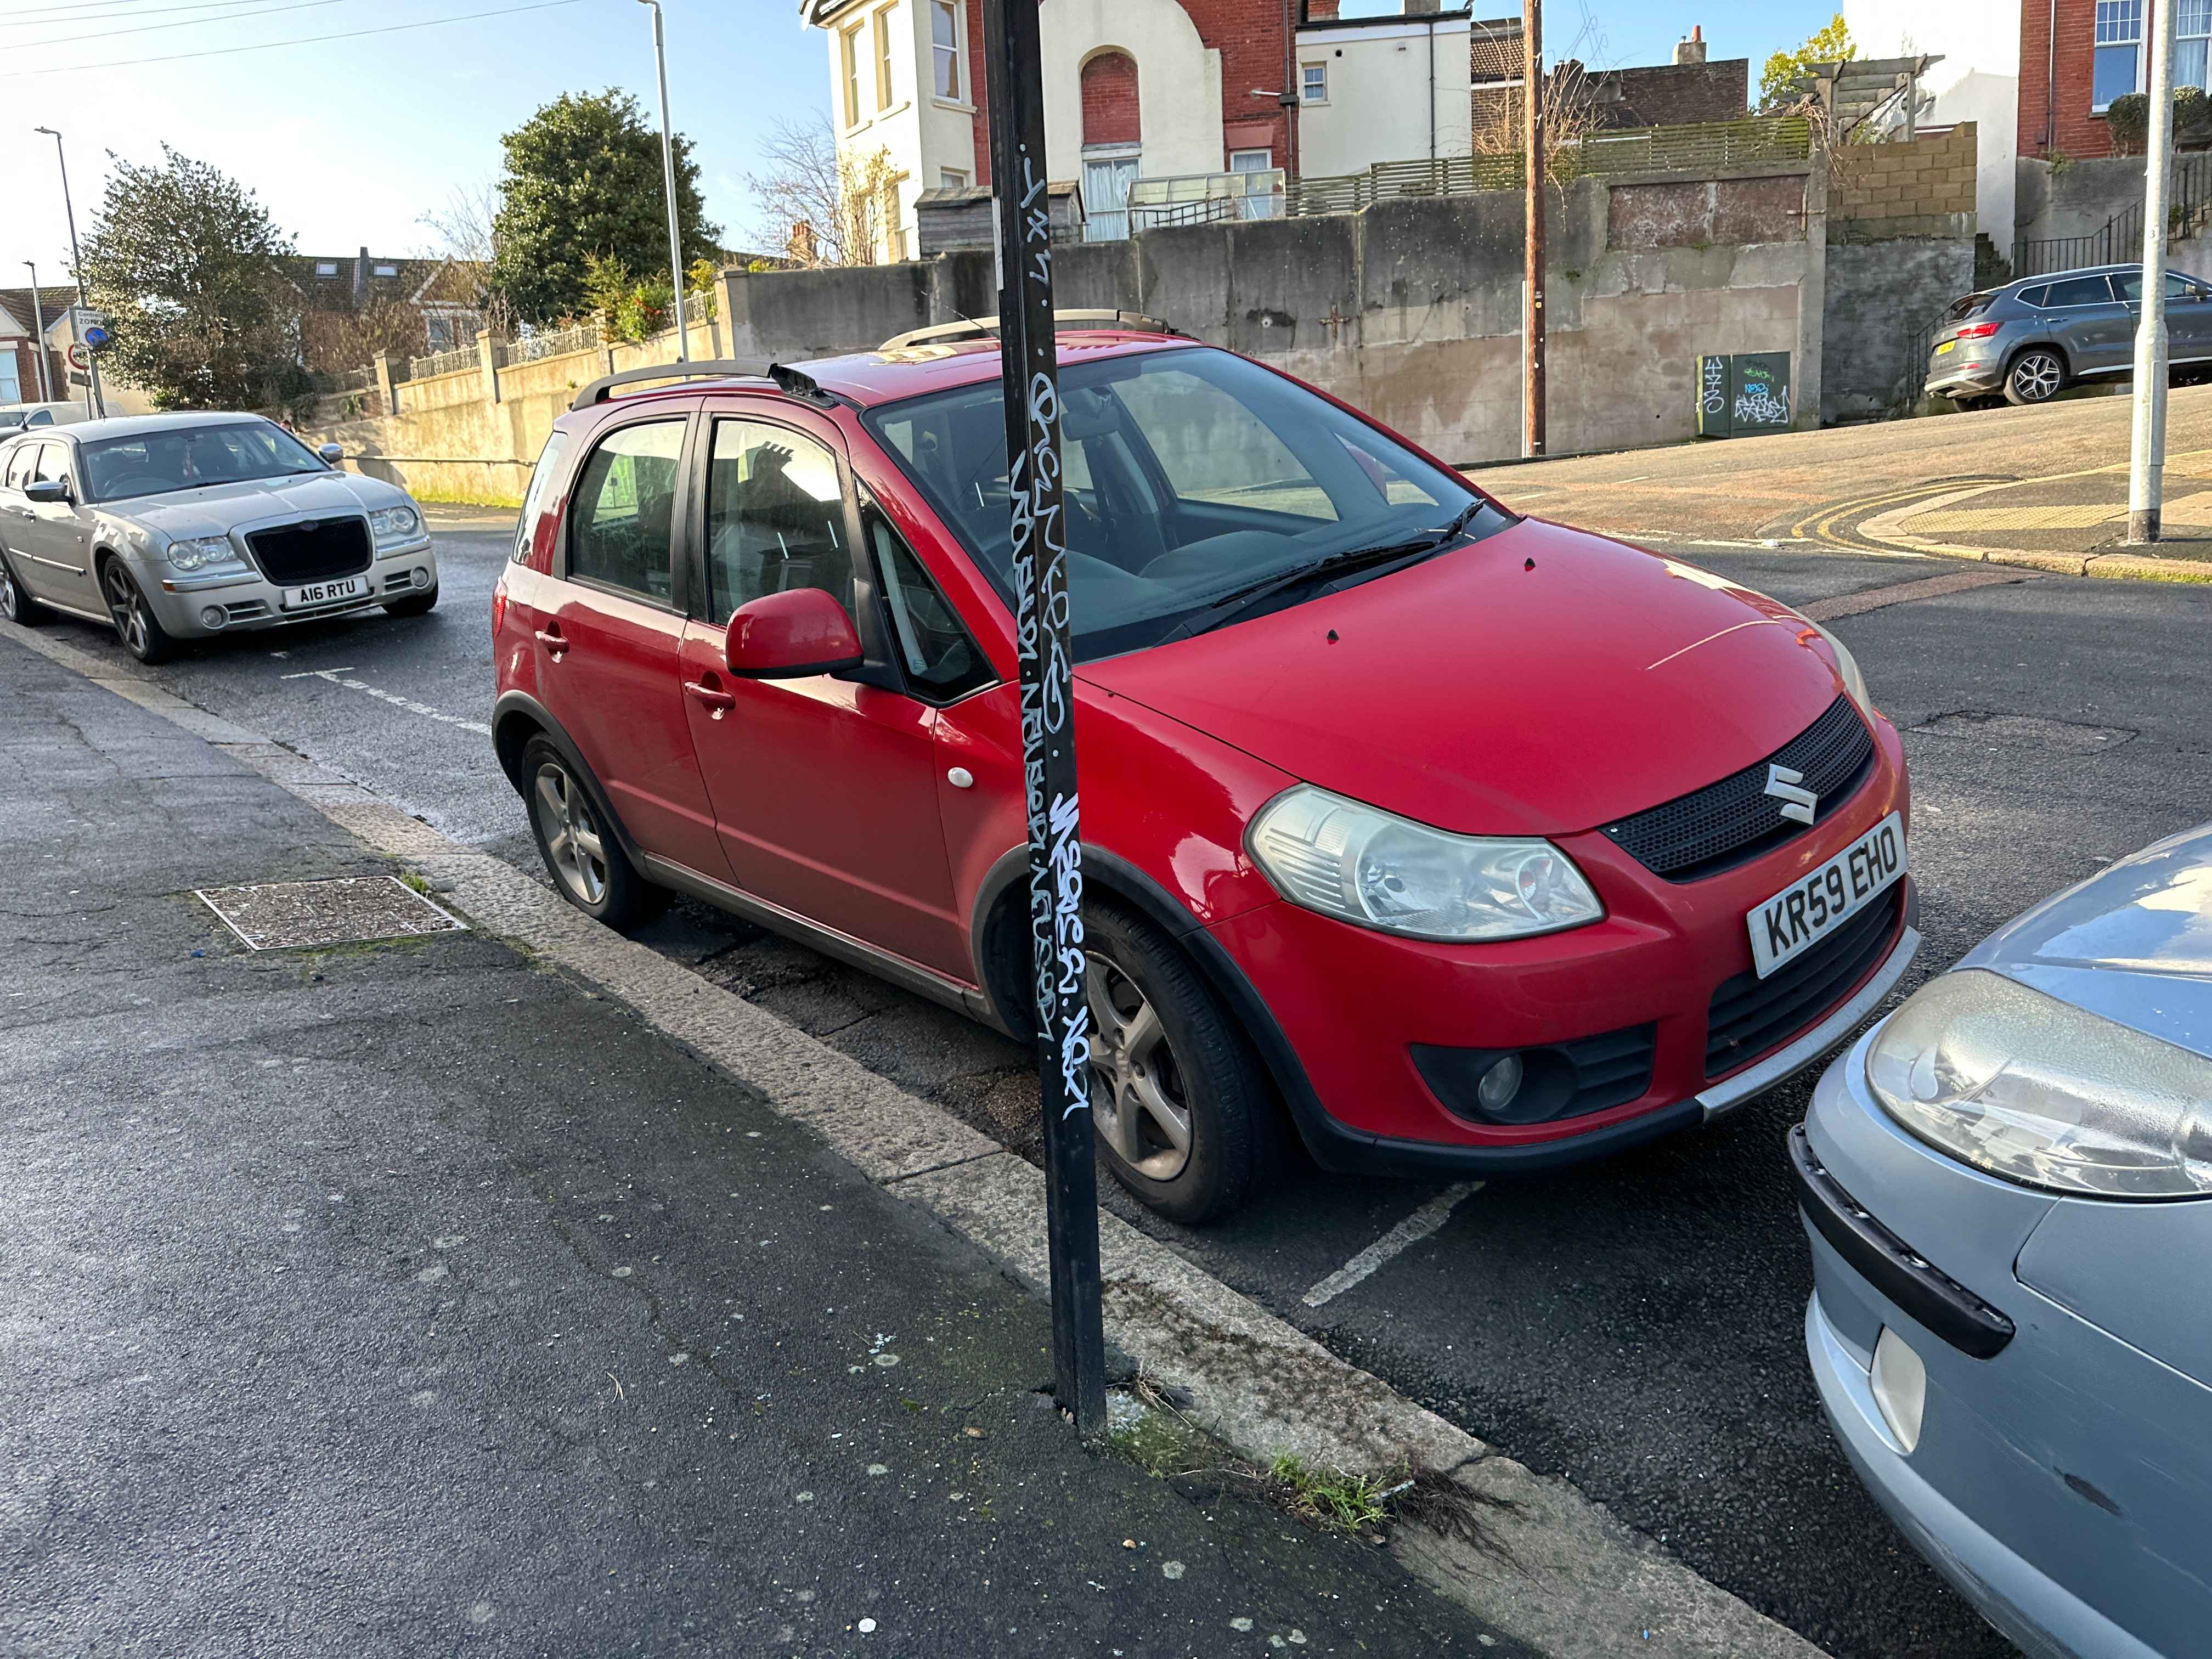 Photograph of KR59 EHO - a Red Suzuki SX4 parked in Hollingdean by a non-resident who uses the local area as part of their Brighton commute. The fourth of four photographs supplied by the residents of Hollingdean.